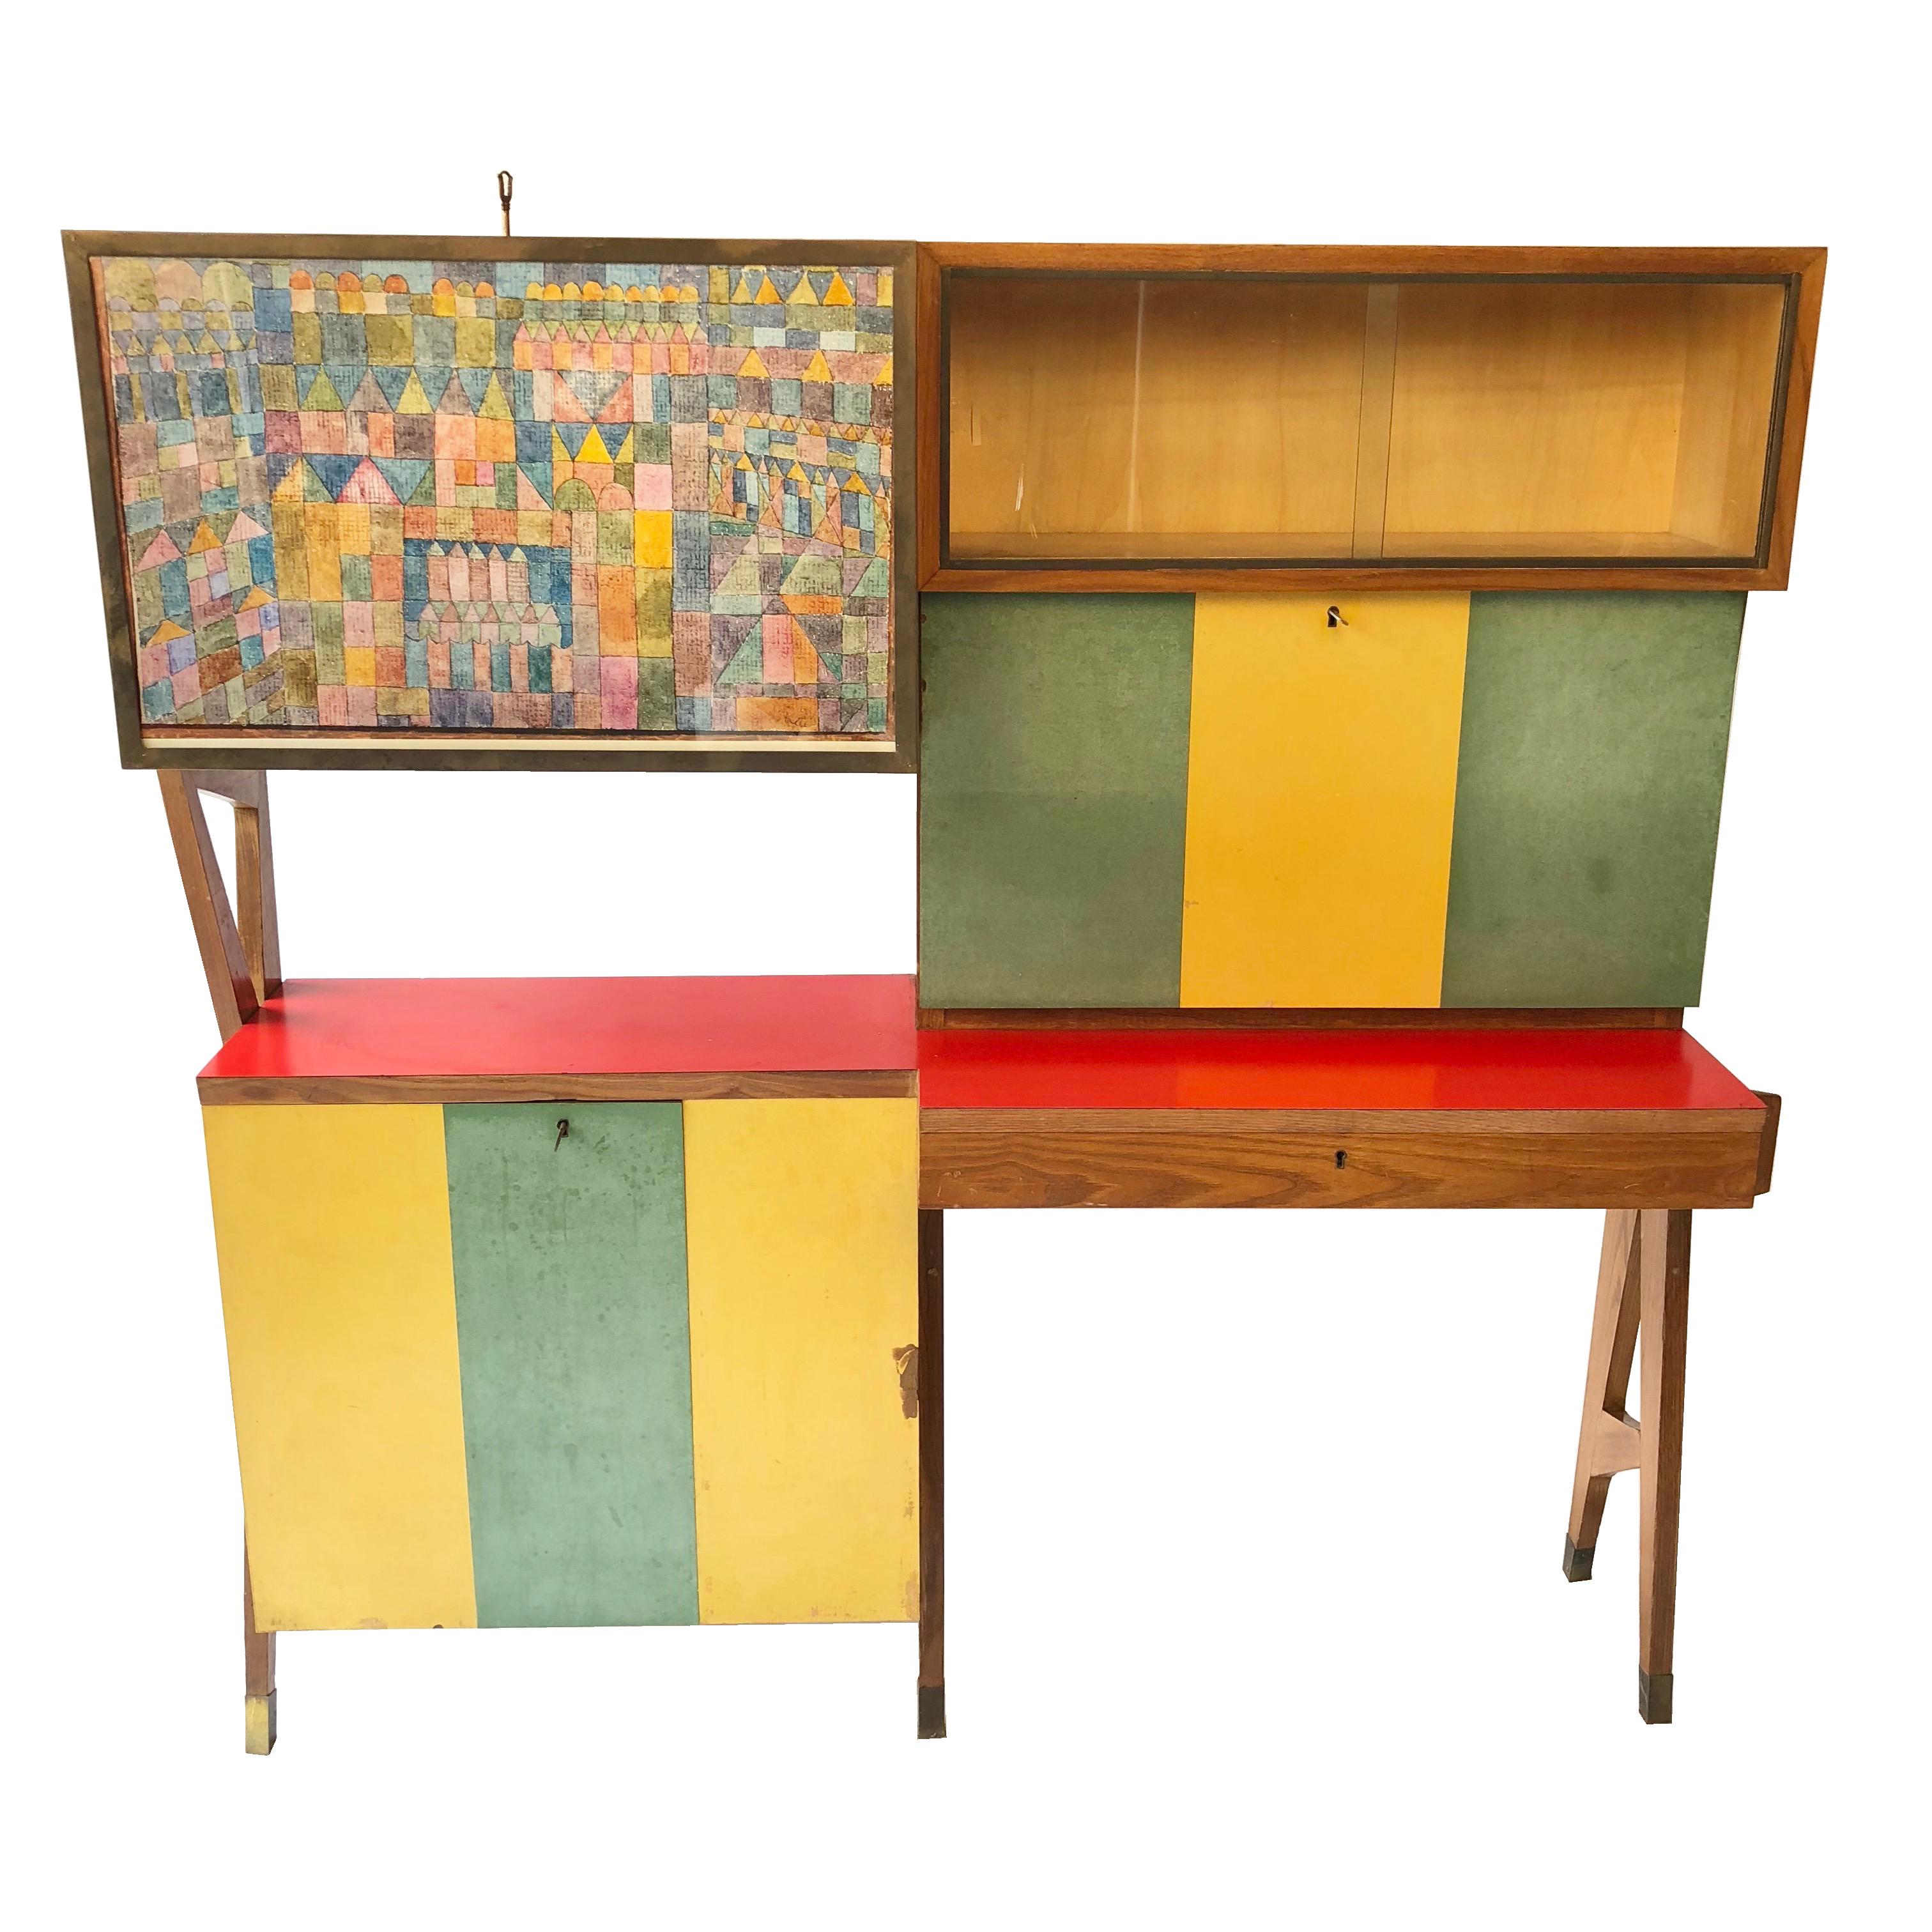 Rare Colored Italian Dry Bar Cabinet and Secretary Mid-Century Modern In Good Condition For Sale In Rome, IT